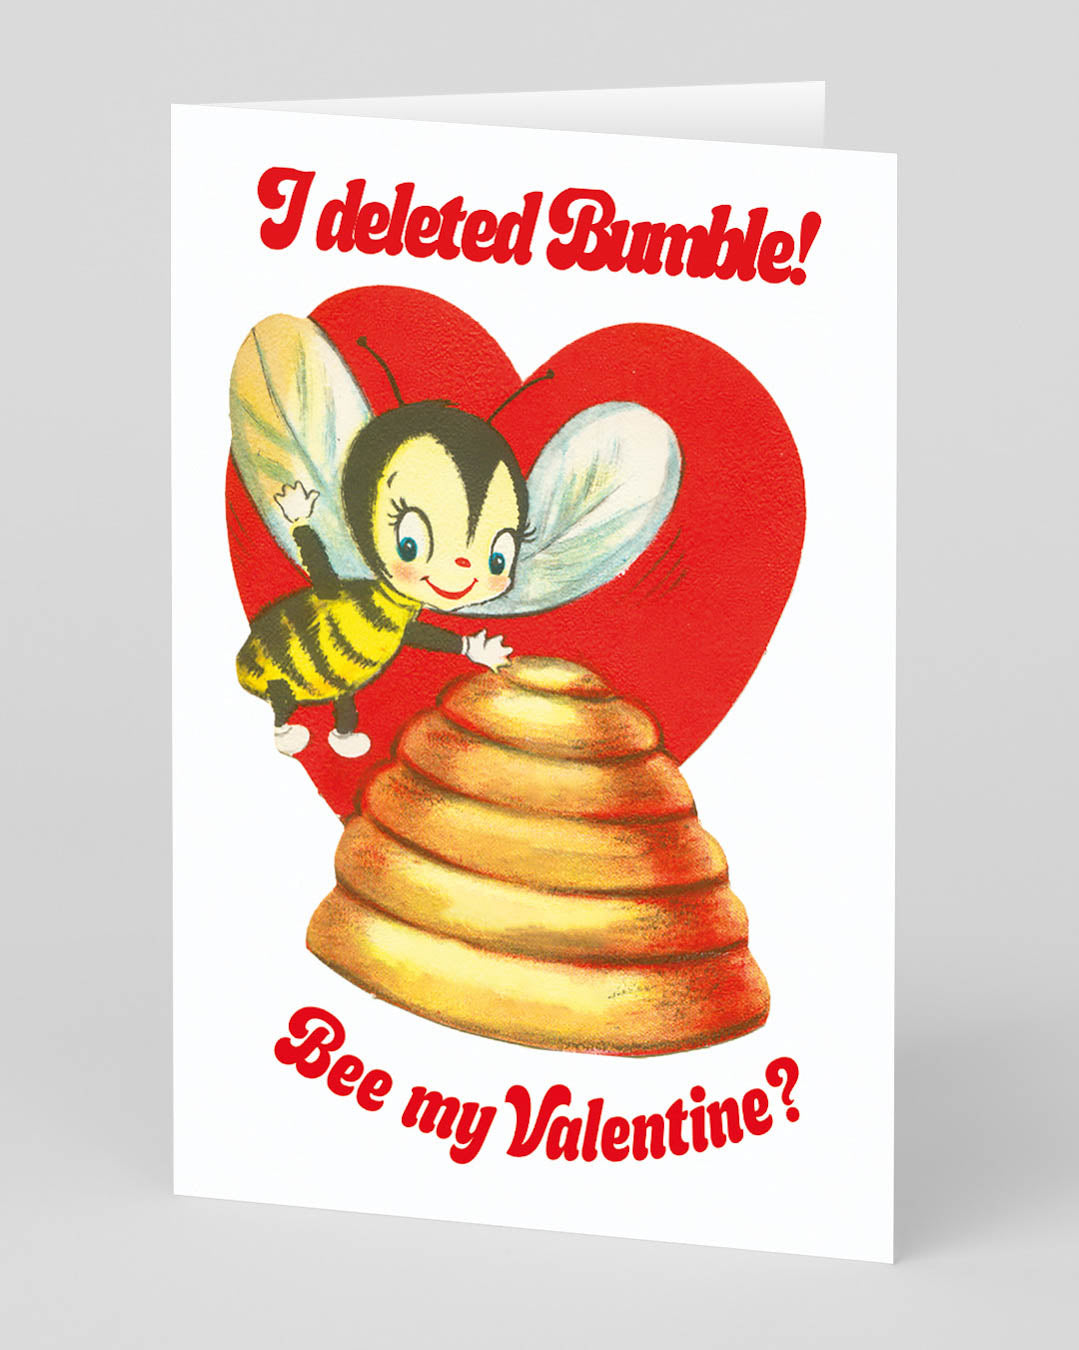 Valentine’s Day | Funny Valentines Card For Animal Lovers | Personalised Bee My Valentine Card | Ohh Deer Unique Valentine’s Card for Him or Her | Artwork by Smitten Kitten | Made In The UK, Eco-Friendly Materials, Plastic Free Packaging